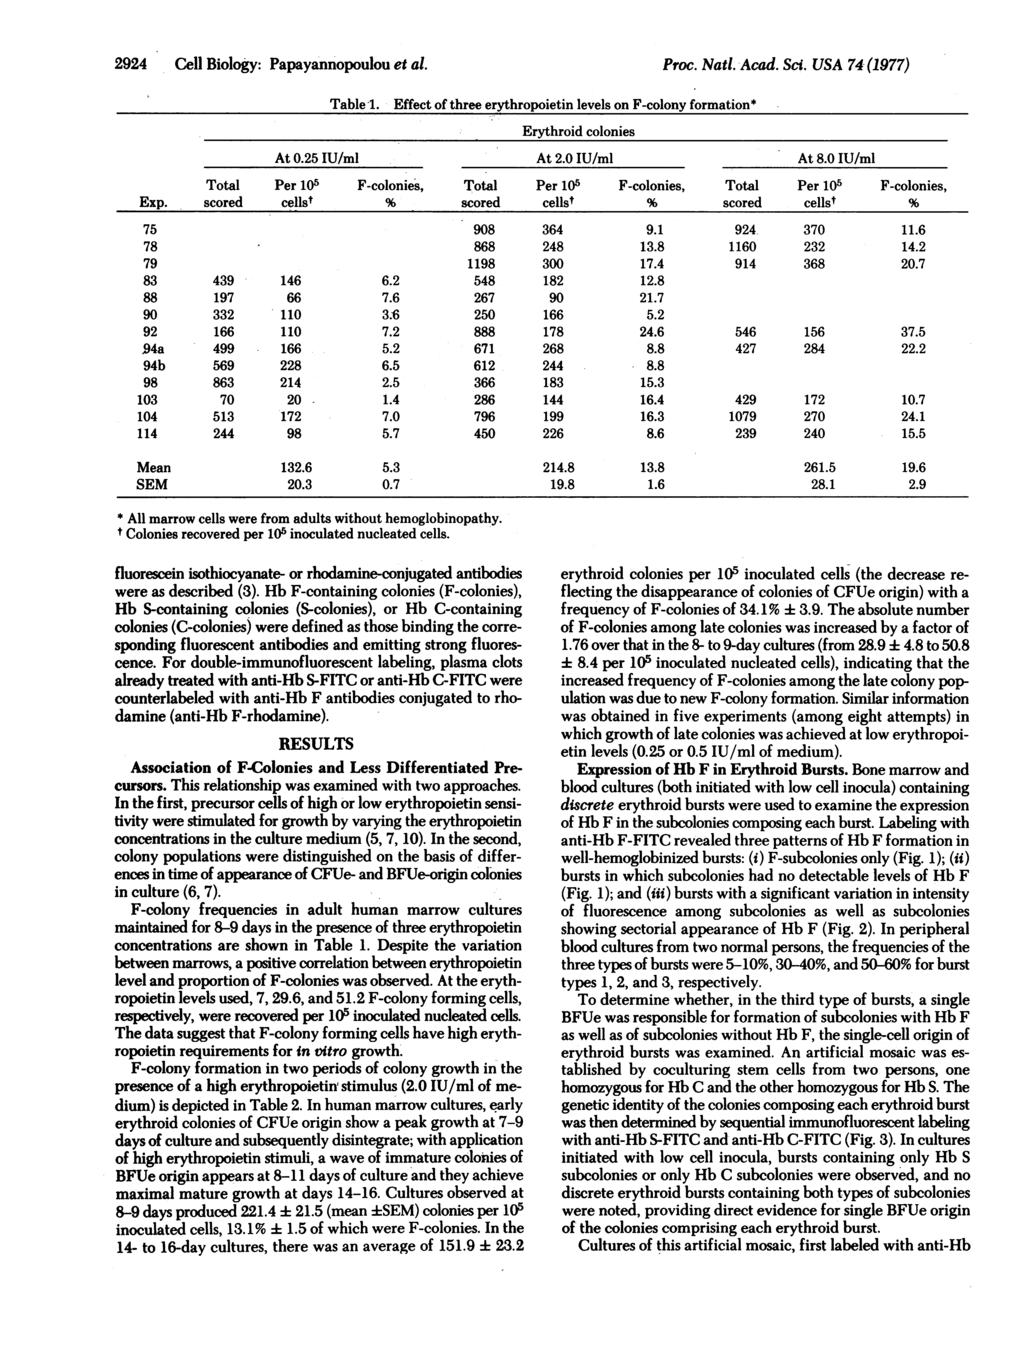 2924 Cell Biology: Papayannopoulou et al. Proc. Nad. Acad. Sci. USA 74- (1977) Table 1. Effect of three erythropoietin levels on F-colony formation* Erythroid colonies At 0.25 IU/ml At 2.0 IU/ml At 8.